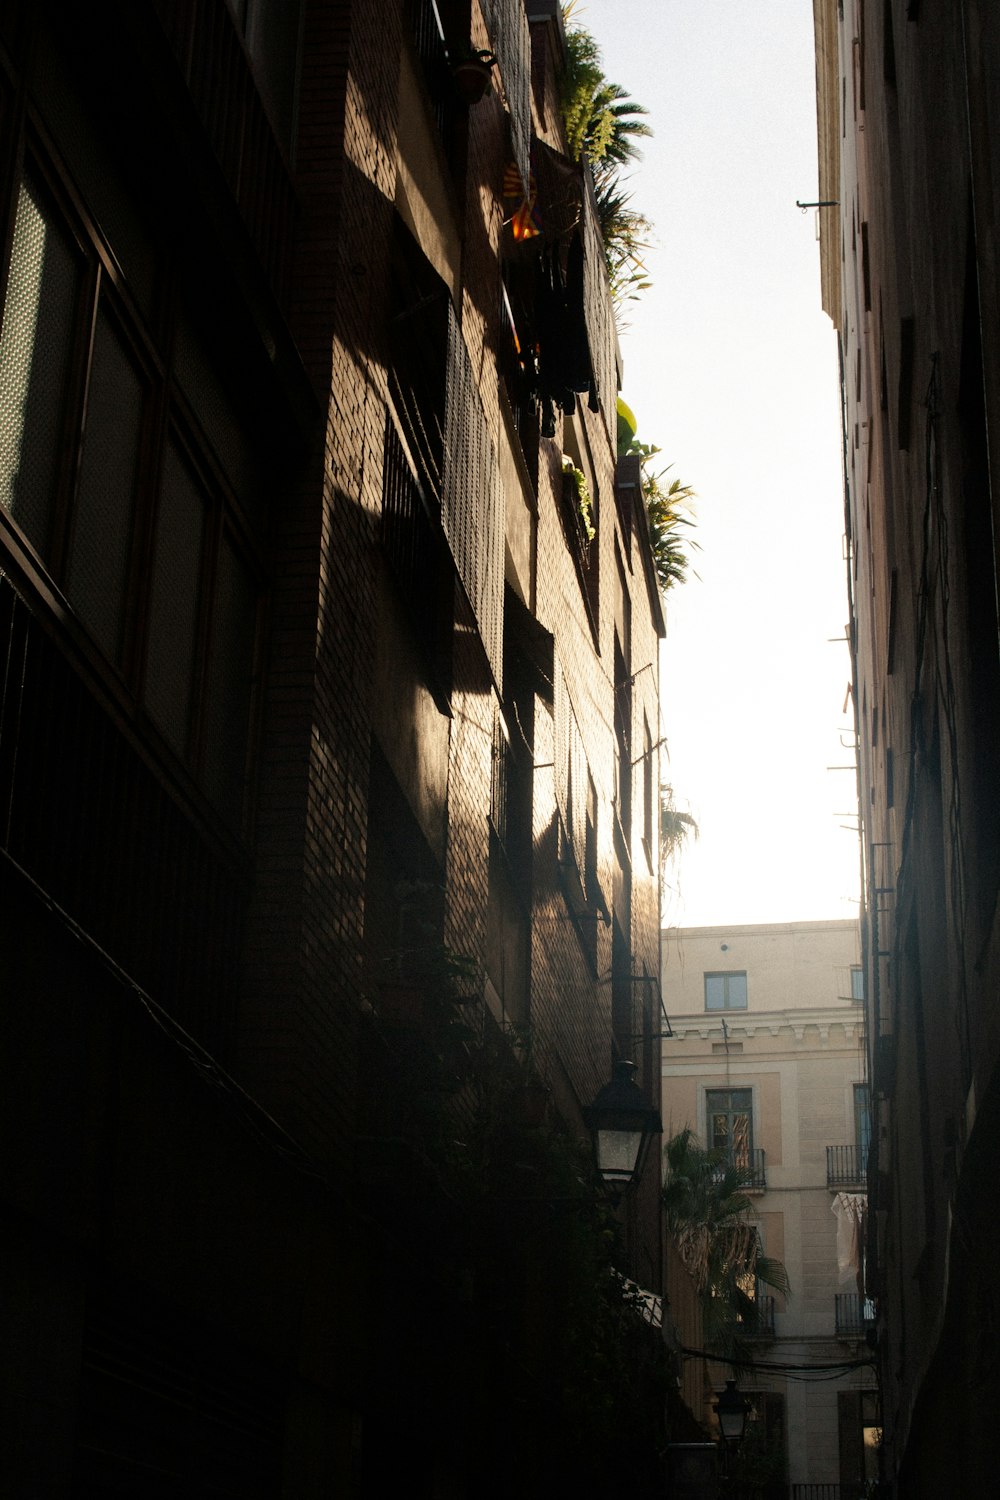 a narrow alley way with a building and palm trees